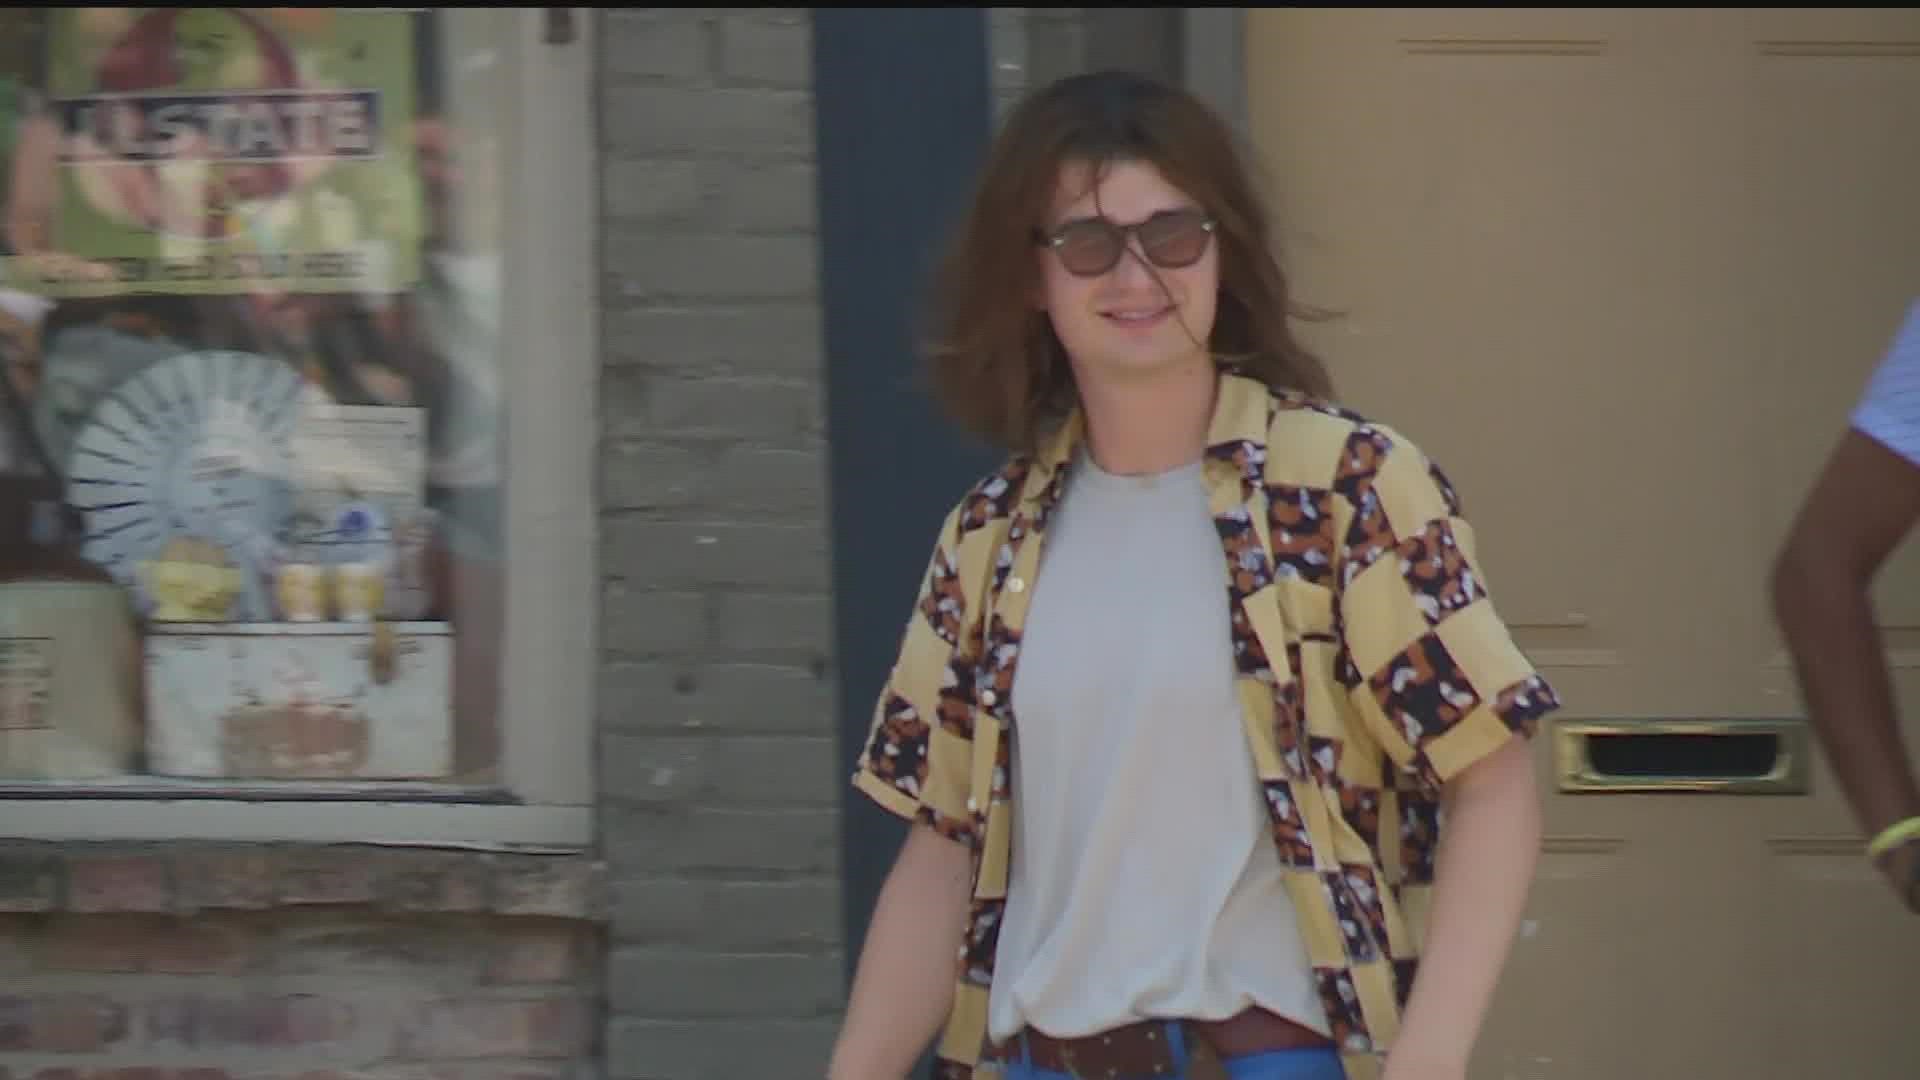 A production crew found an ideal location for a movie scene featuring actor Joe Keery. The owner initially wanted no part of it. She's glad she changed her mind.